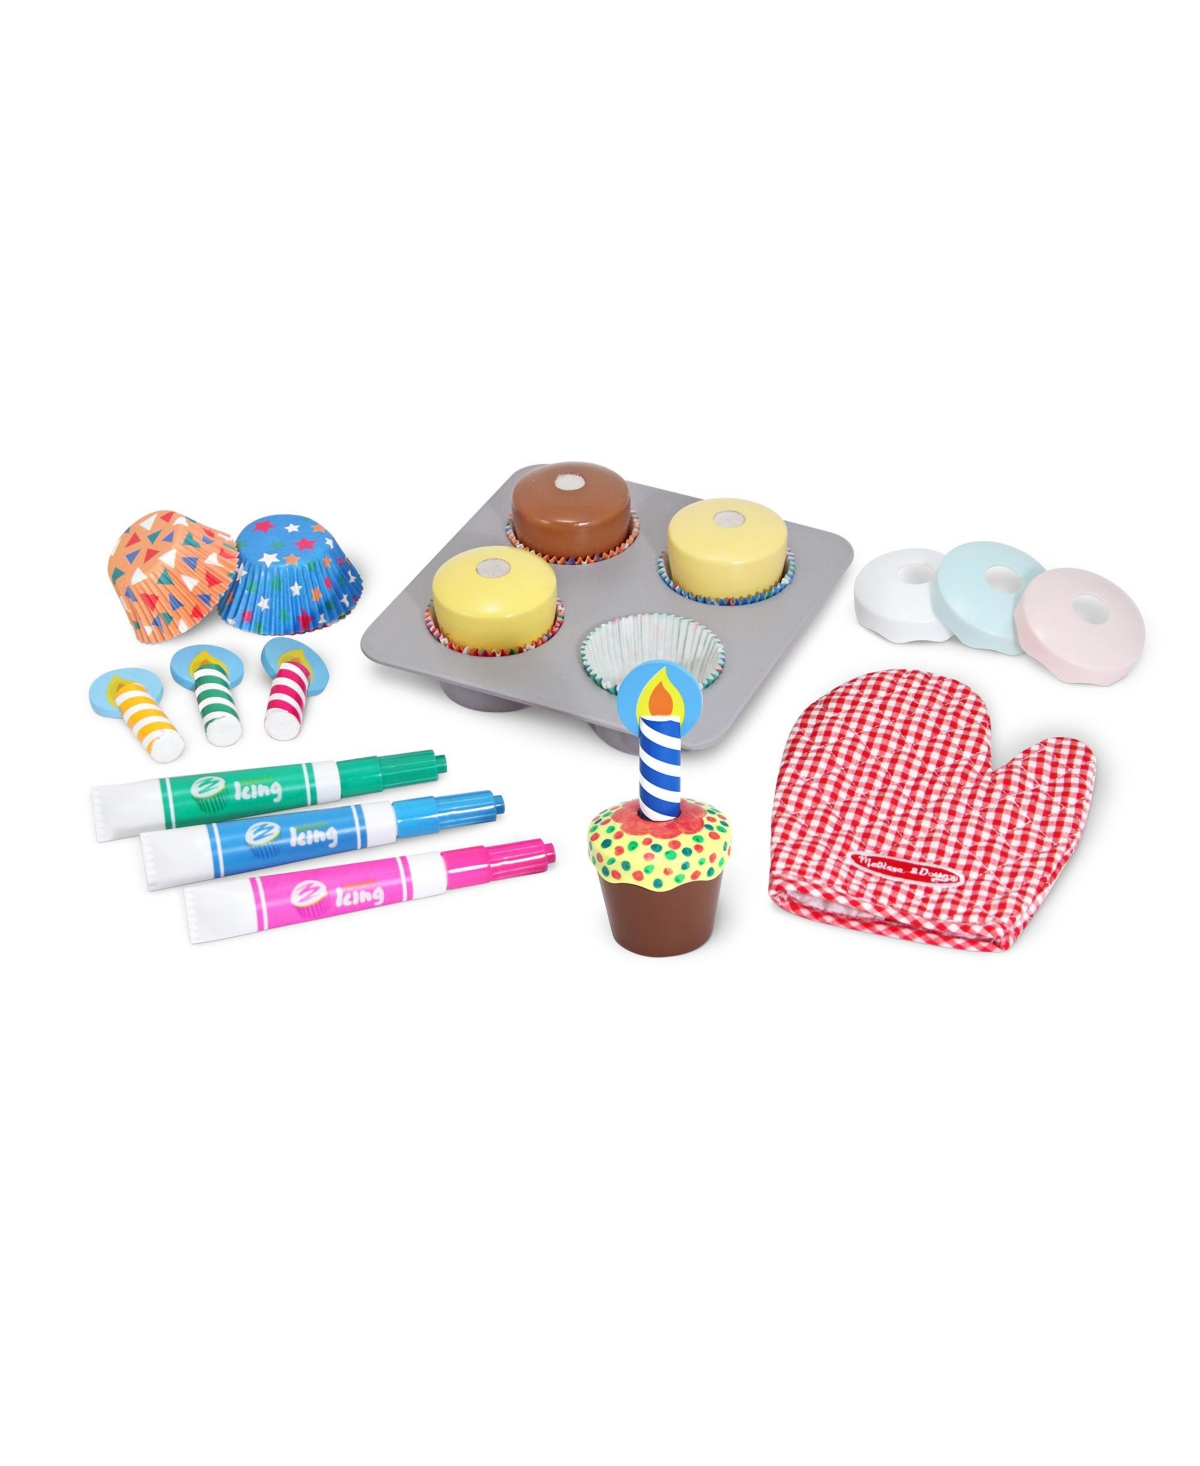 Melissa & Doug Kids' Toy, Bake And Decorate Cupcake Set In Multi